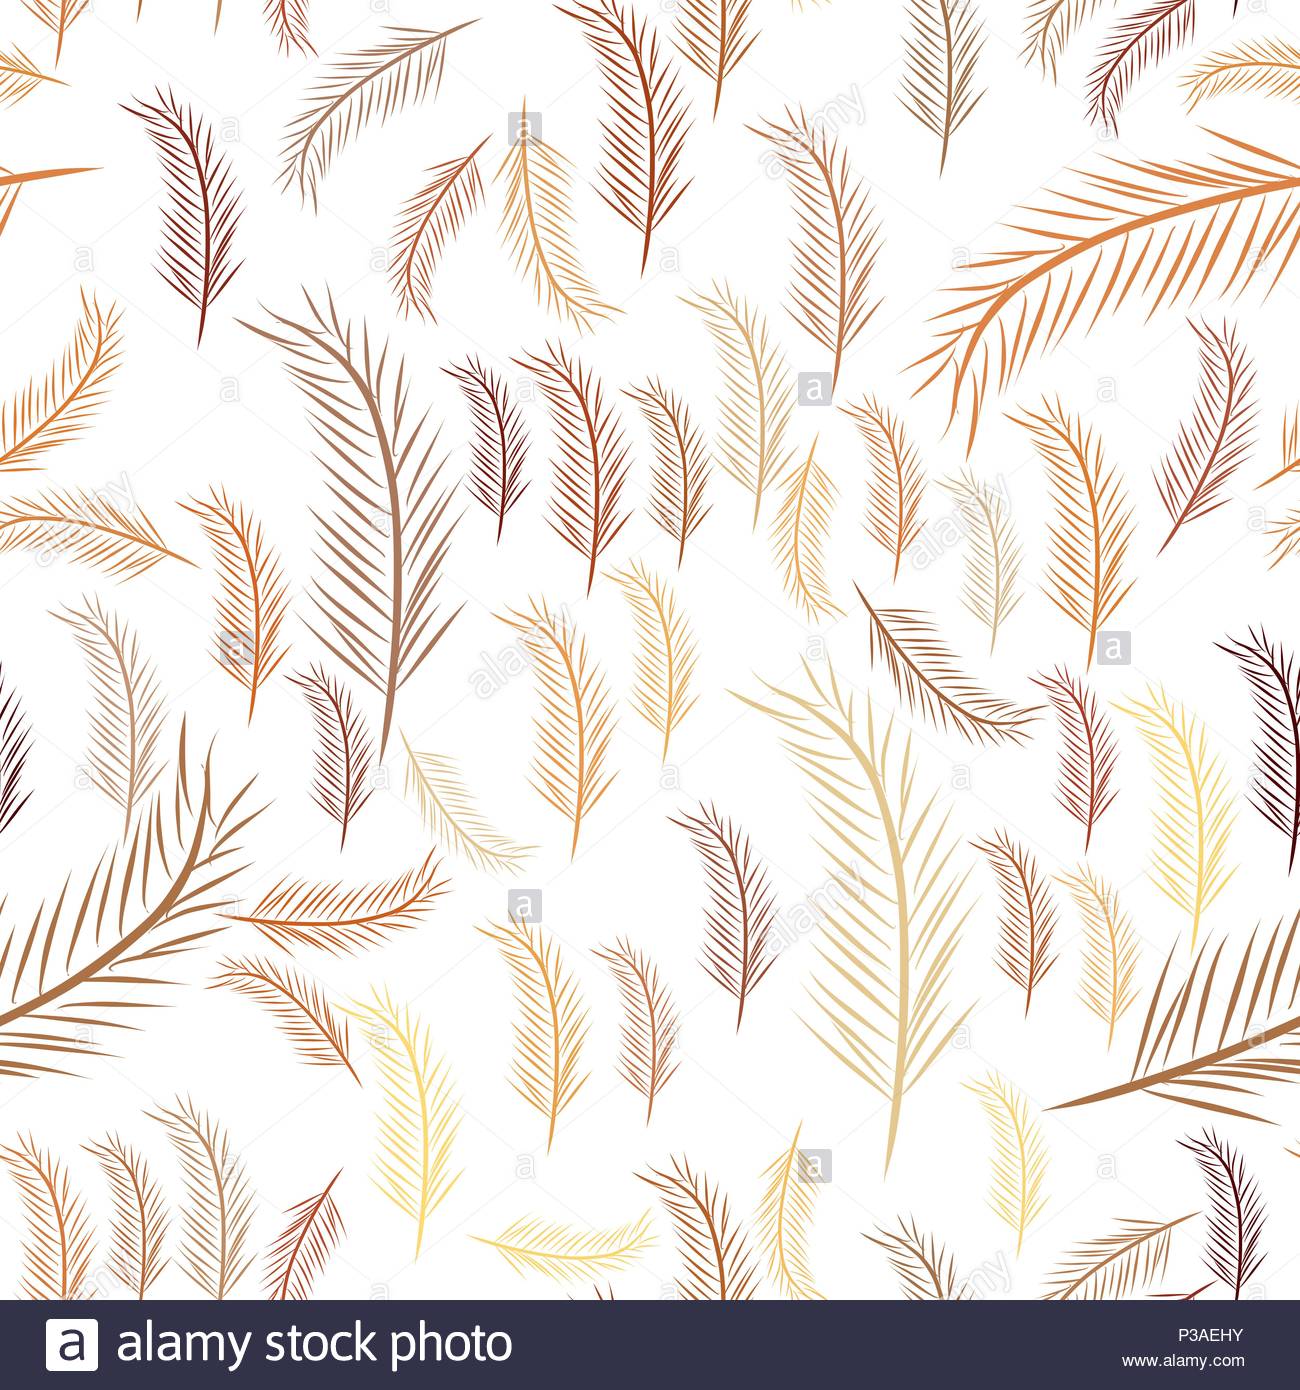 Seamless Illustrations Of Feather Good For Web Wallpaper